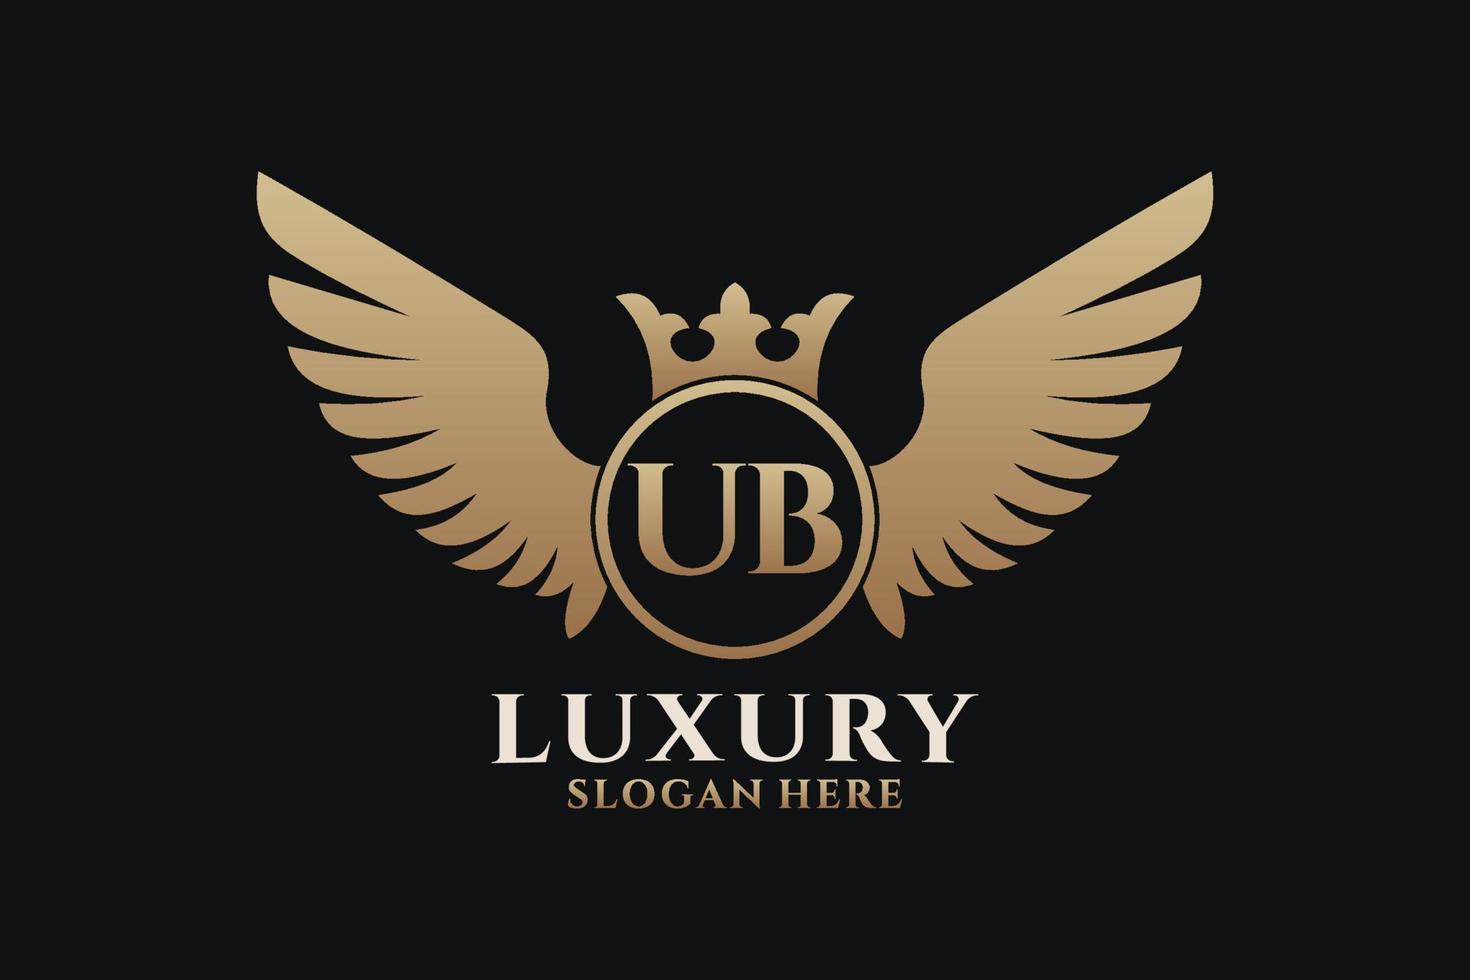 Luxury royal wing Letter UB crest Gold color Logo vector, Victory logo, crest logo, wing logo, vector logo template.